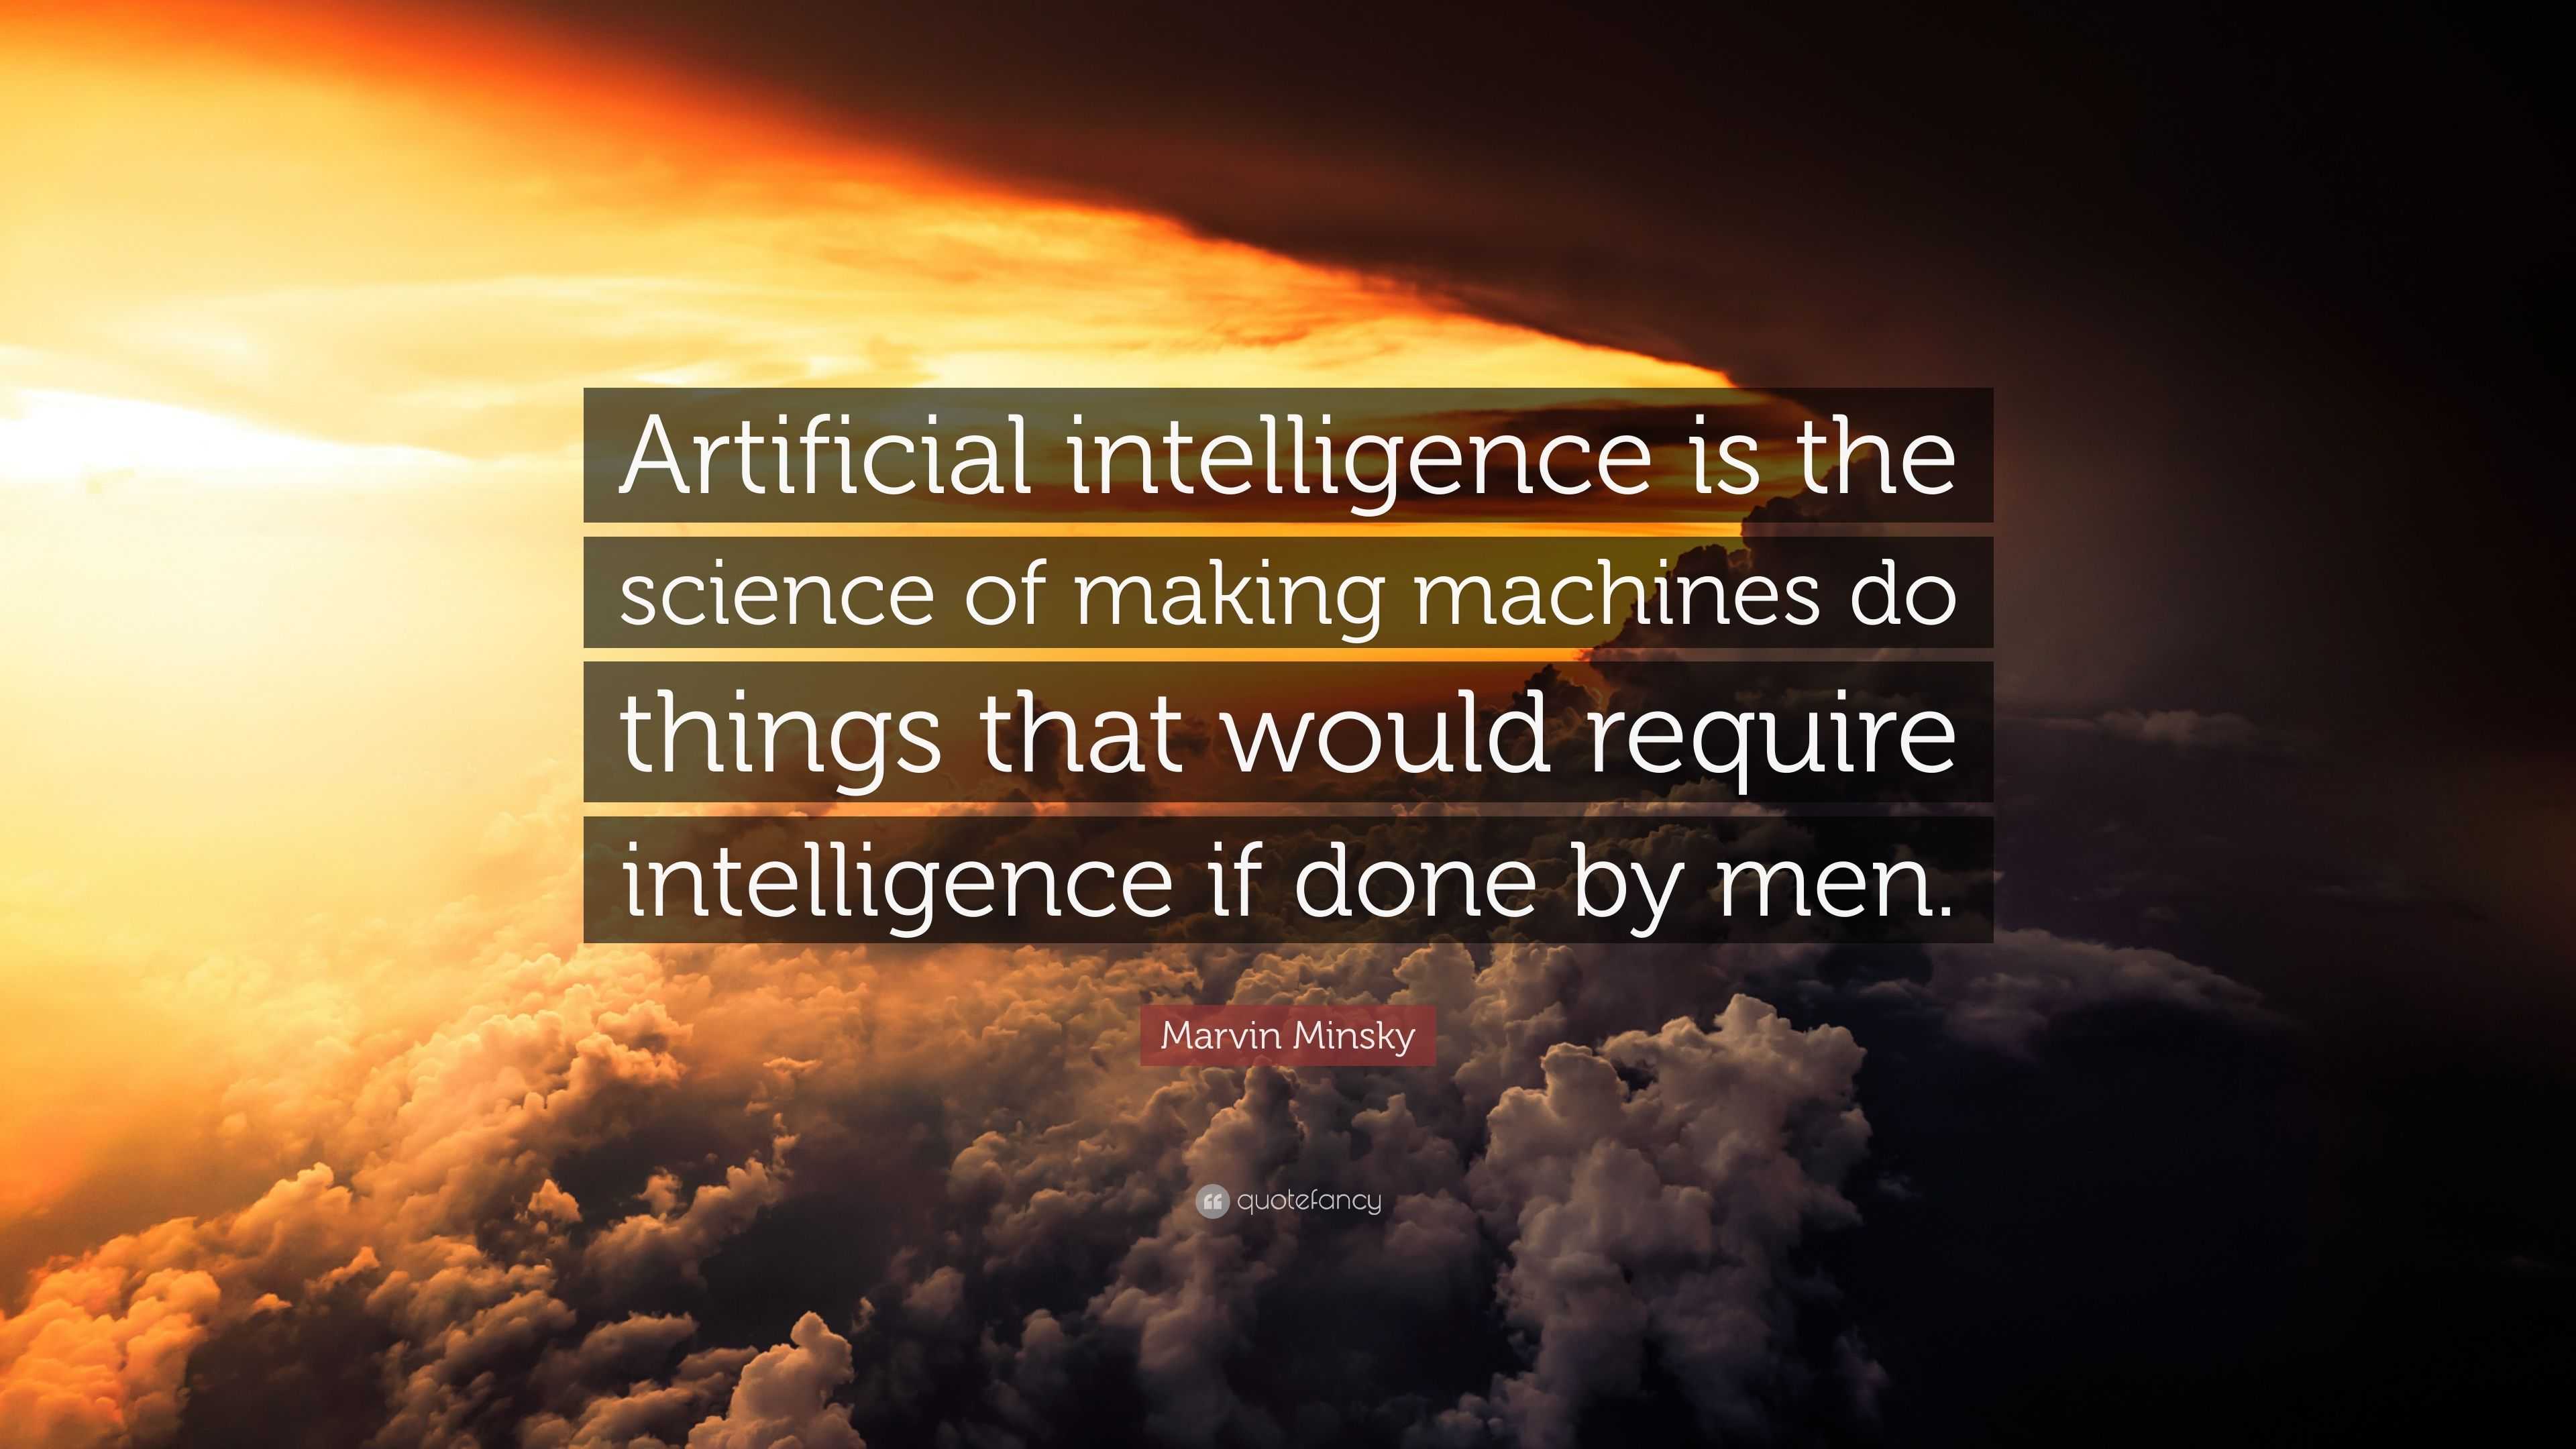 Quotes On Artificial Intelligence - KAMPION